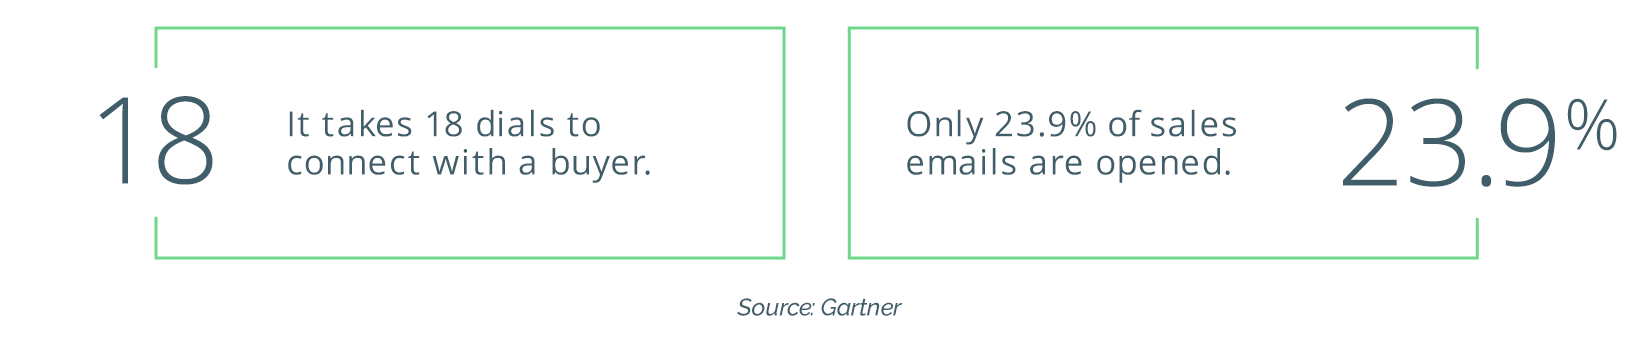 Graphic of stats: “It takes 18 dials to connect with a buyer. Only 23.9% of sales emails are opened” - Gartner